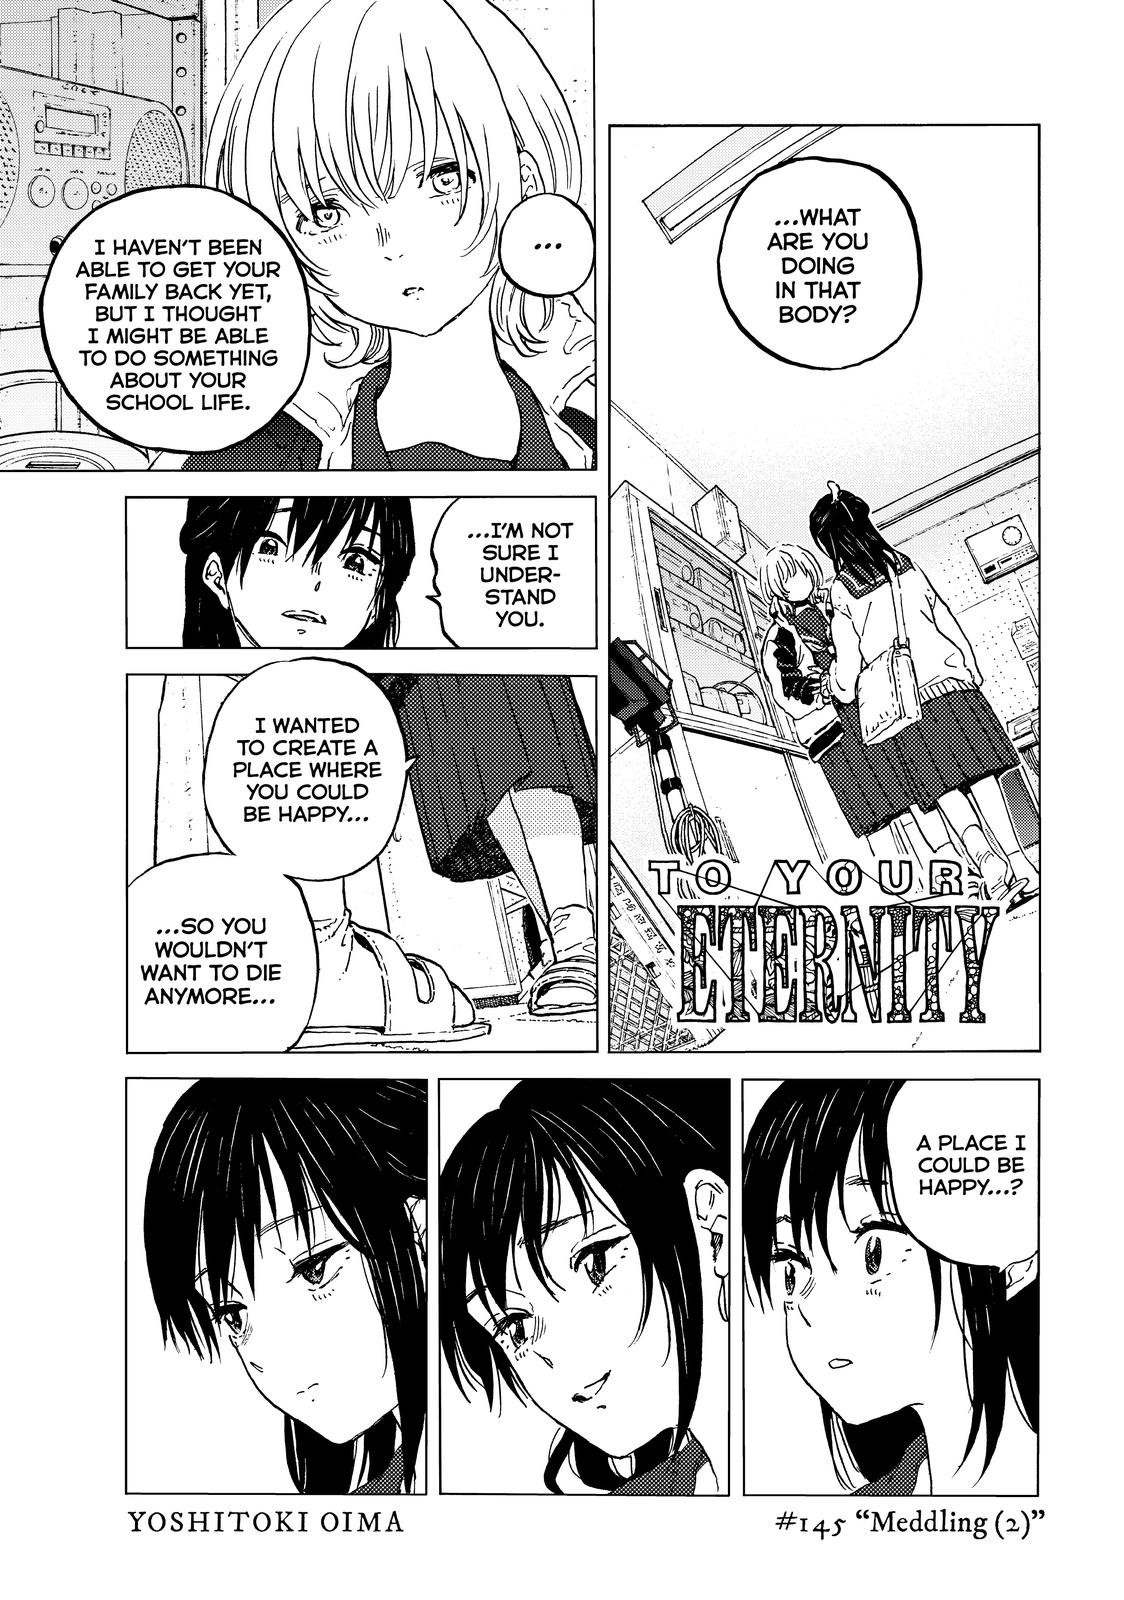 to your eternity, to your eternity manga, read to your eternity, read to your eternity manga, to your eternity anime, to your eternity anime release date, to your eternity wiki, to your eternity characters, to your eternity anime adaptation, to your eternity episode 1, to your eternity fushi, to your eternity review, to your eternity tv tropes, to your eternity myanimelist, to your eternity release date, to your eternity anime episode 1, to your eternity anime studio, to your eternity about, to your eternity amazon, to your eternity anime trailer, to your eternity anime reddit, to your eternity anime characters, to your eternity box set, to your eternity baka, to your eternity barnes and noble, to your eternity buy, to your eternity bon, to your eternity boy, to your eternity band 11, to your eternity band 3, but steps to your eternity meaning, to your eternity band 12, to your eternity crunchyroll, to your eternity chapter, to your eternity cast, to your eternity comixology, to your eternity comic, to your eternity cover, fumetsu no anata e wiki, fumetsu no anata e mal, fumetsu no anata e voice actor, fumetsu no anata e delayed, fumetsu no anata e crunchyroll, fumetsu no anata e 120, read Fumetsu no Anata e, Fumetsu no Anata e manga, to your eternity dub, to your eternity discussion, to your eternity delay, to your eternity danke empire, to your eternity deutsch, to your eternity episode 1 release date, to your eternity nombre de tomes, to your eternity anime date, to your eternity ep 1, to your eternity ending, to your eternity eko, to your eternity episodes, to your eternity english, to your eternity español, to your eternity egmont, to your eternity manga ending,